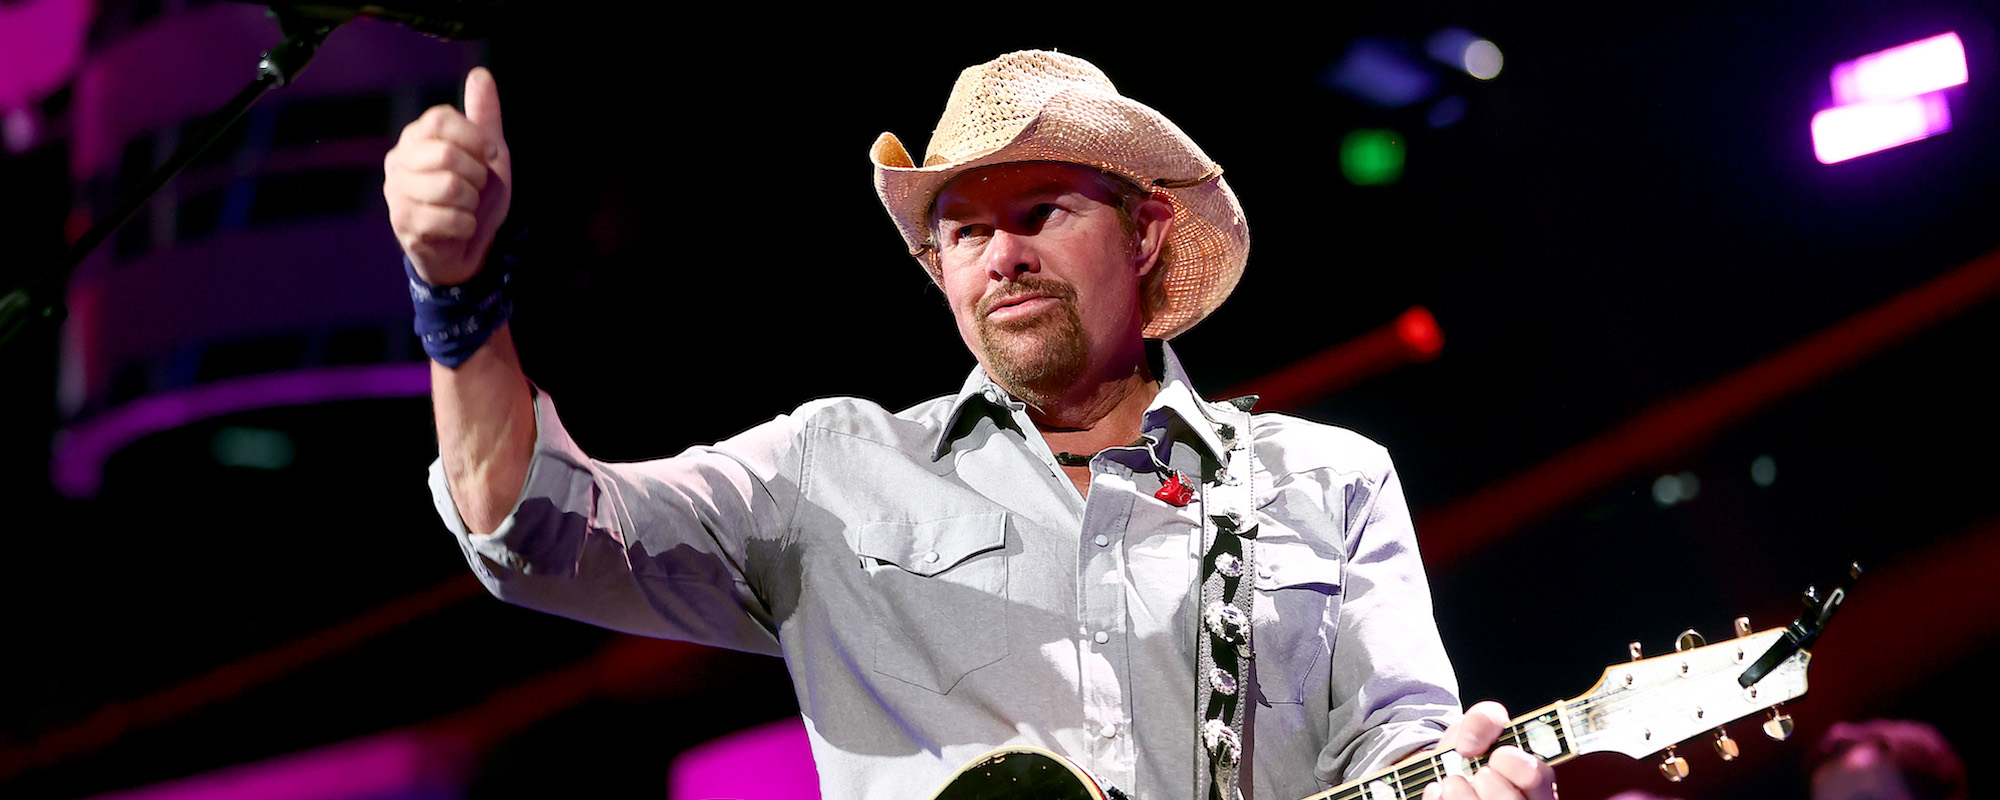 The Embarrassing Dancefloor Rejection Behind Toby Keith’s Debut Single and First No. 1 “Should’ve Been a Cowboy”